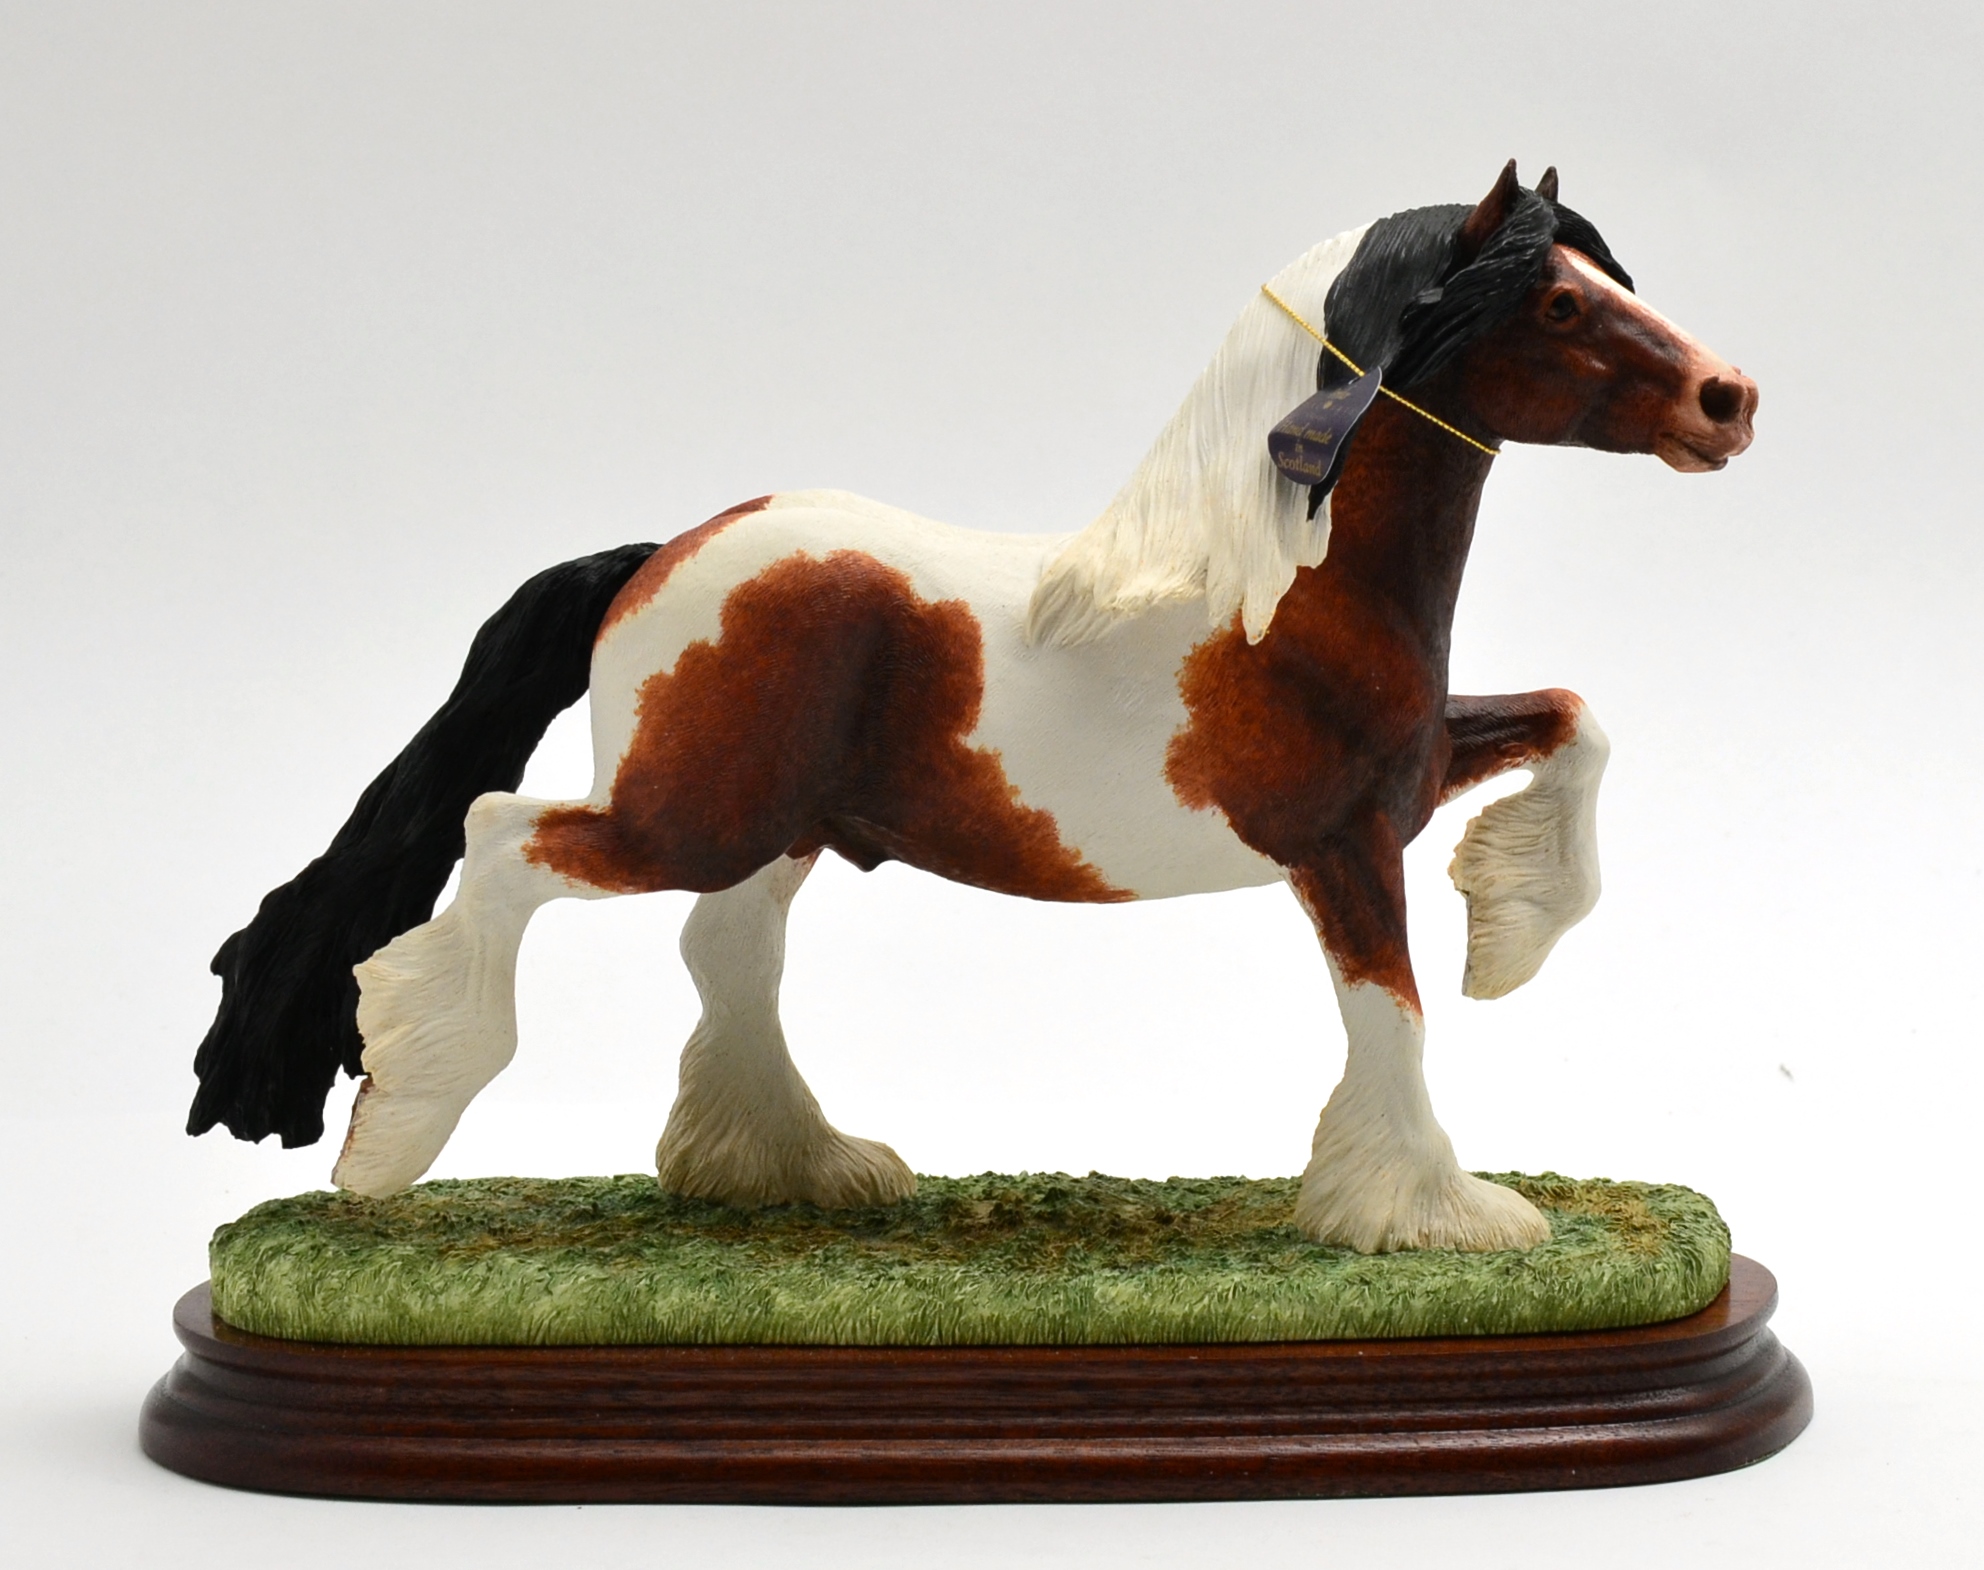 Border Fine Arts 'The Vanna' (Horse), model No. B0952A by Anne Wall, limited edition 304/750, on